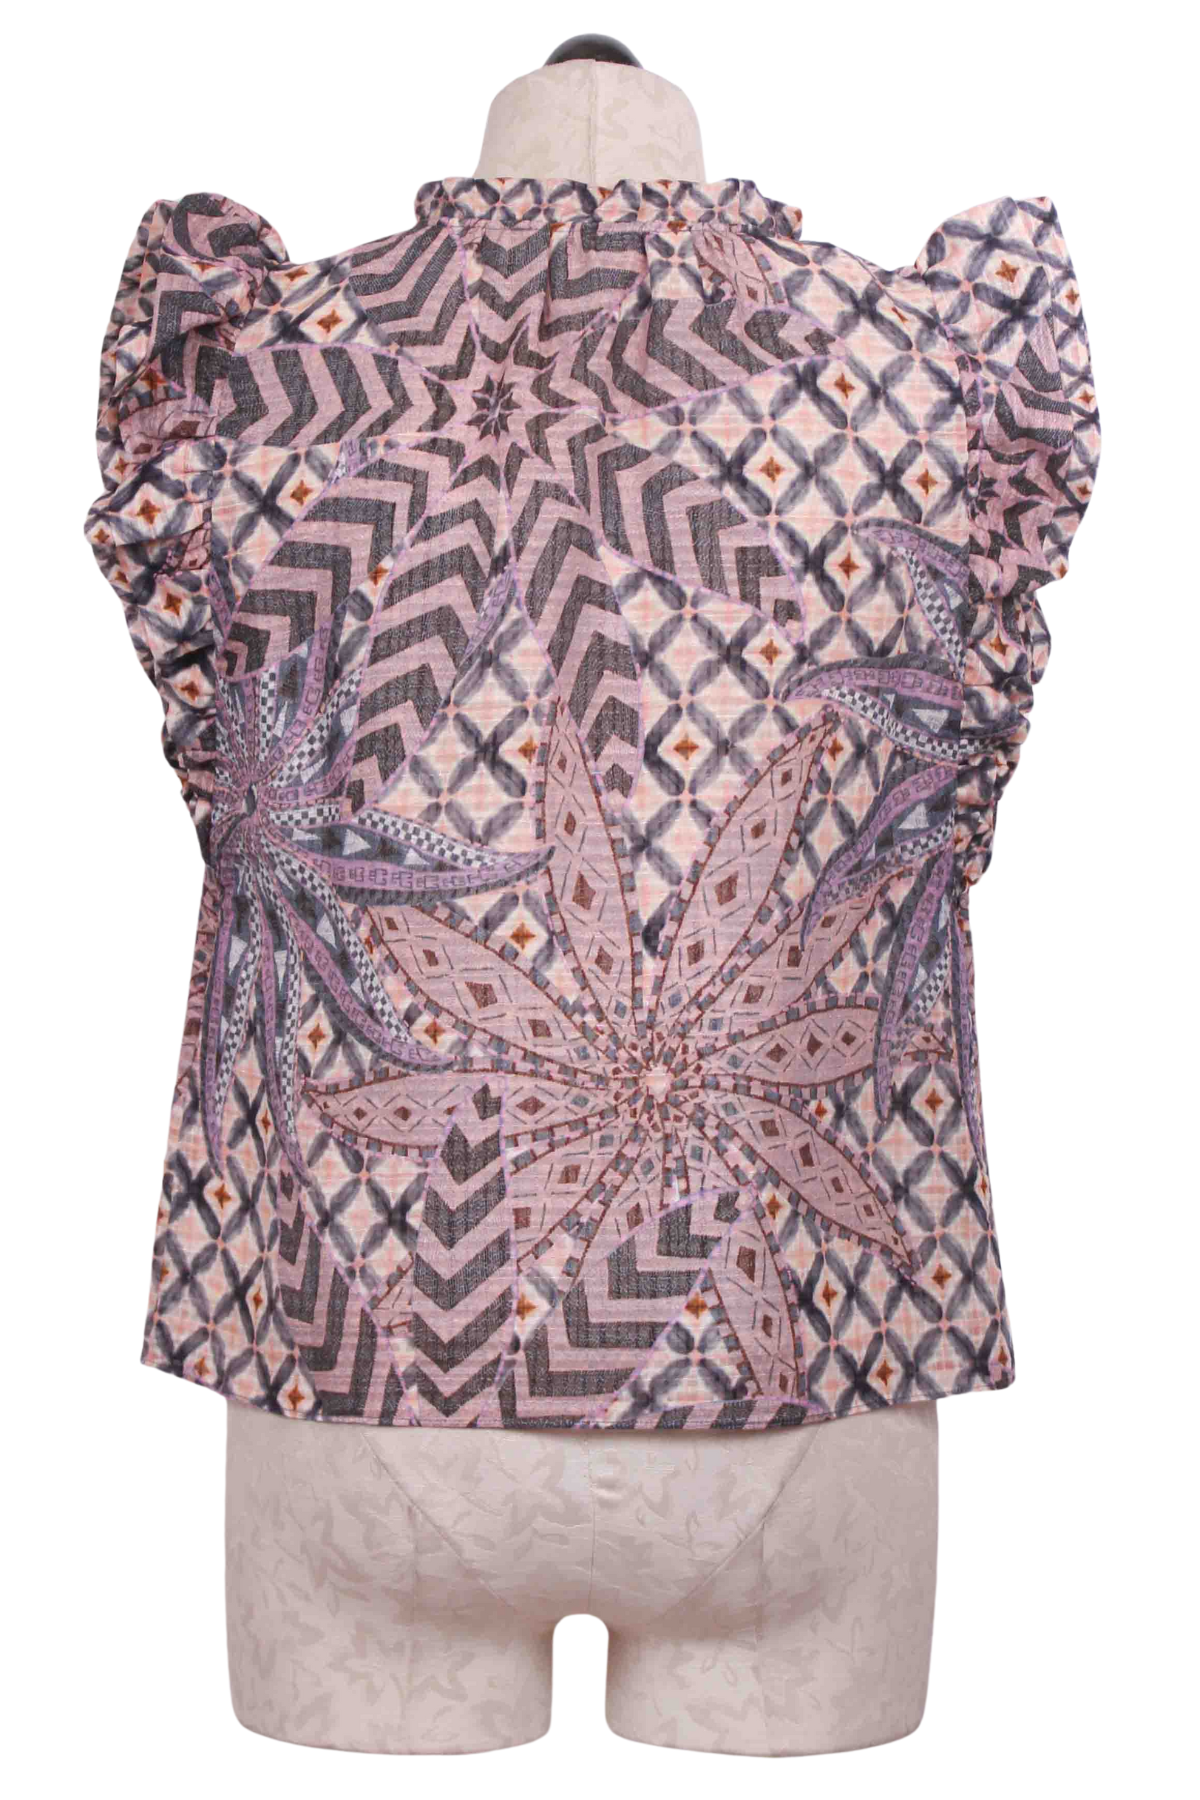 back view of The Merrit Top By Marie Oliver in the Anise Lattice Print